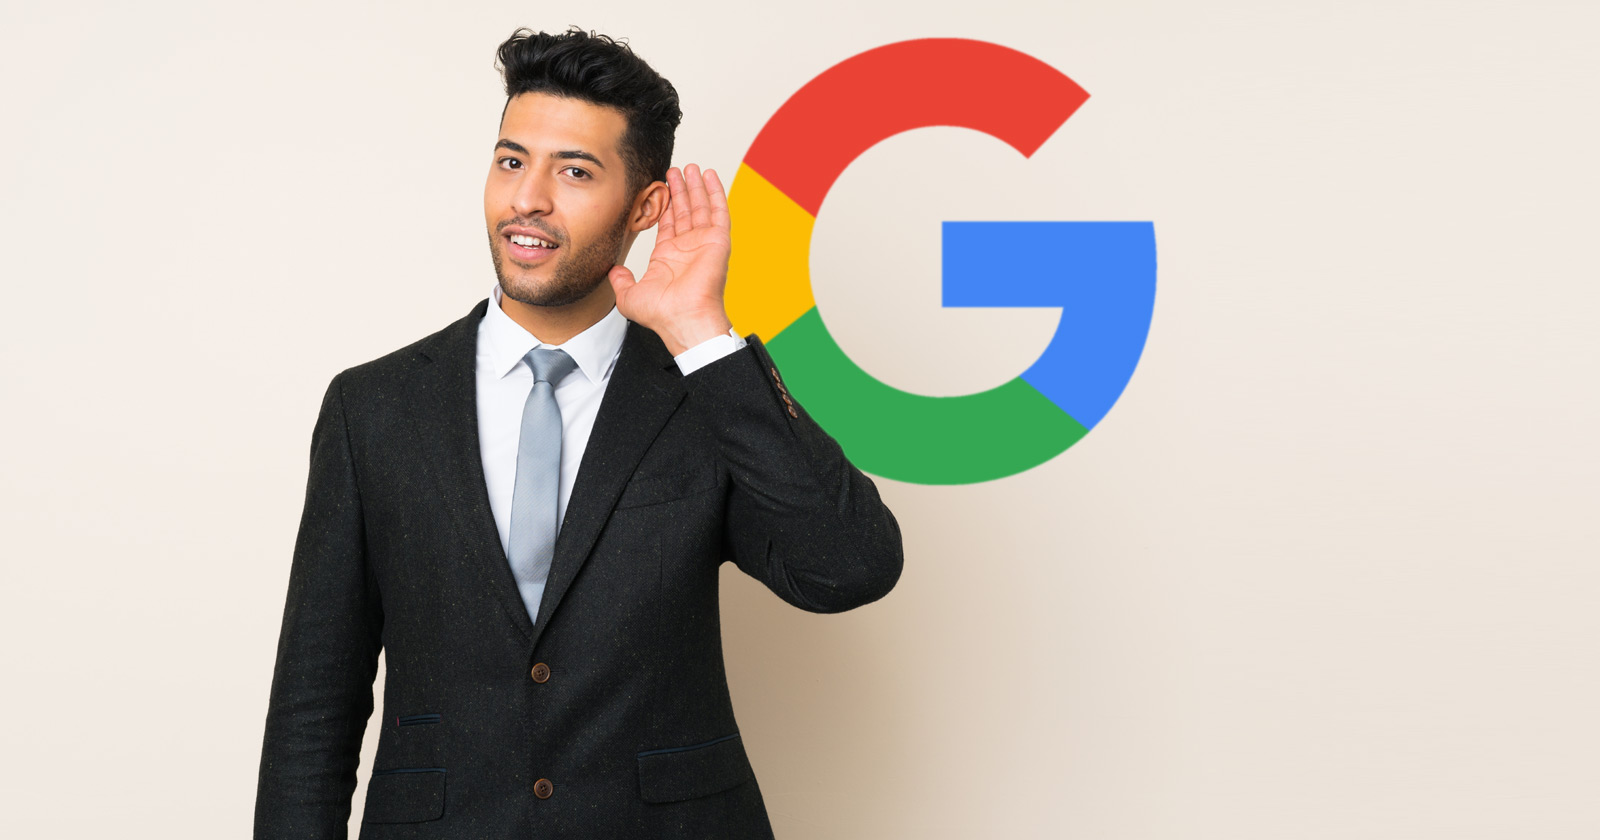 Google Announces 8 New Top Level Domains Including One For Lawyers